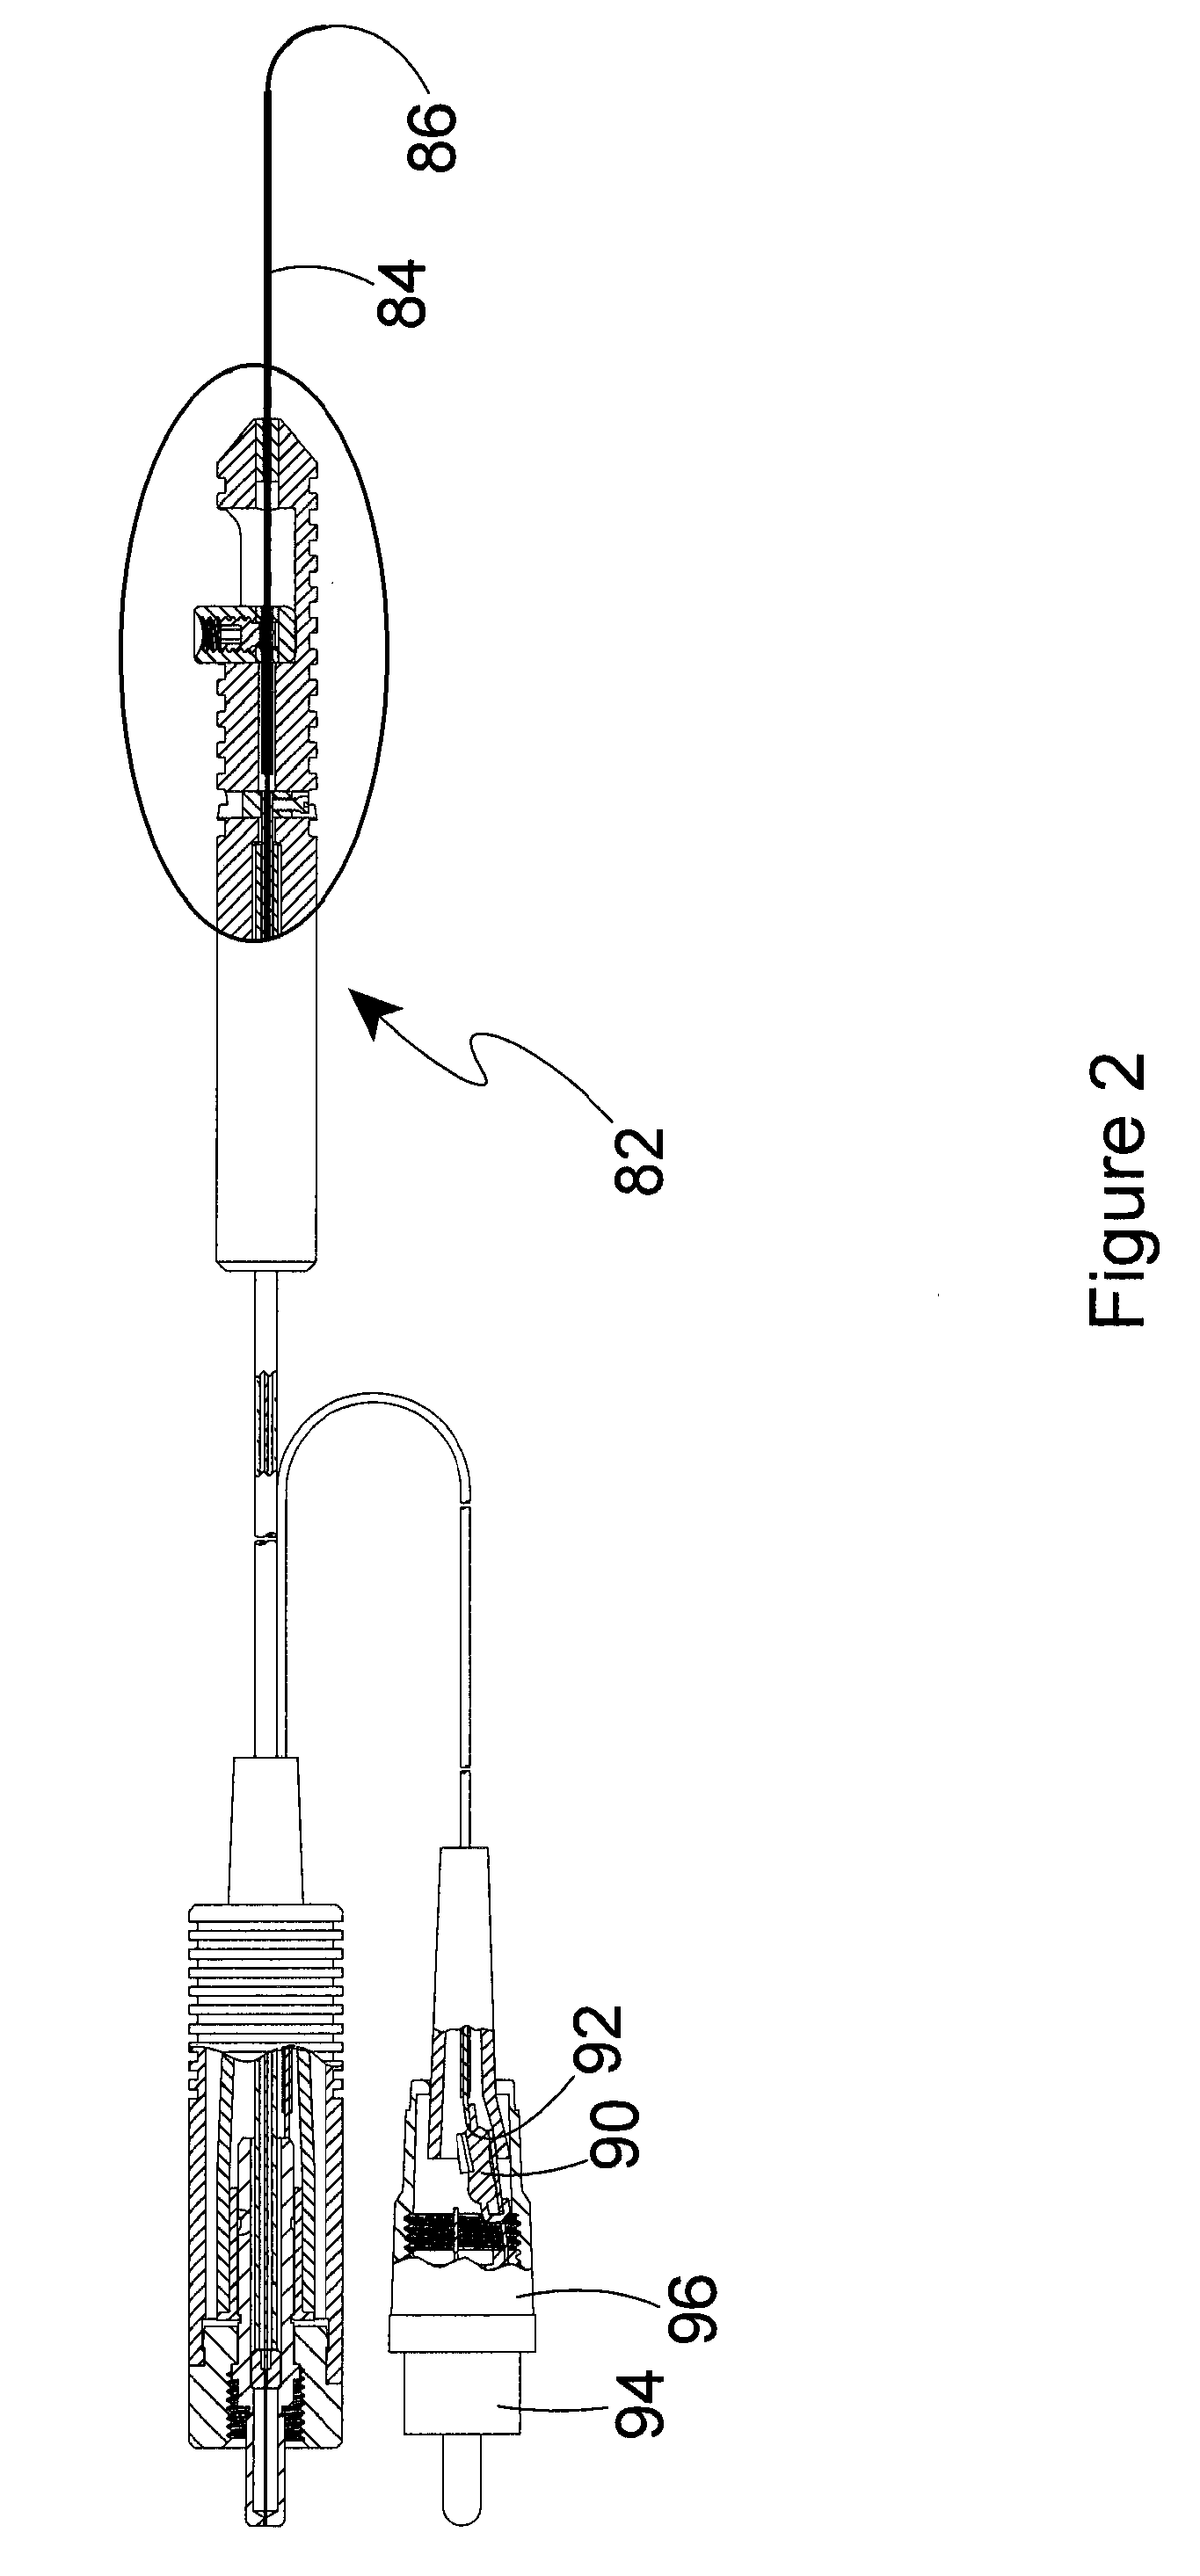 Laser Probe Assembly with Laser Light Source Connector and Electronic Identification Connector